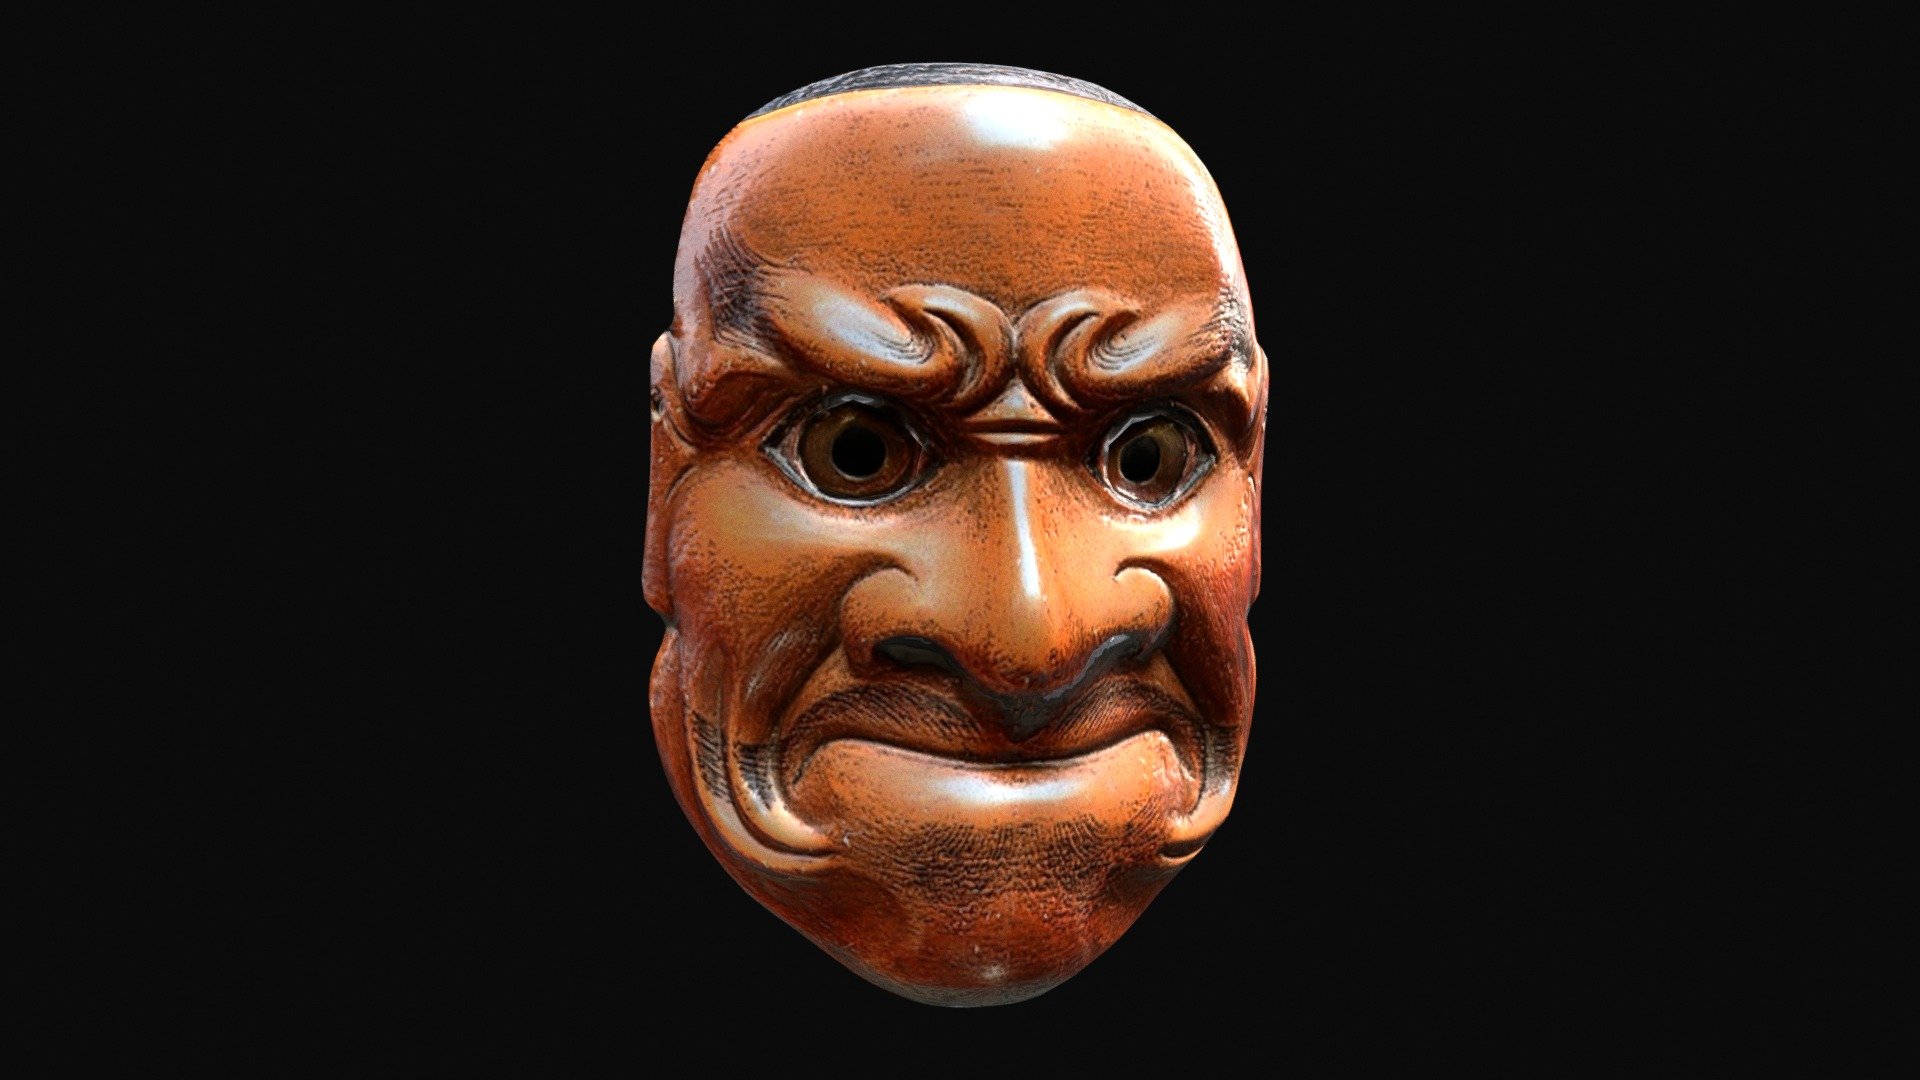 Kobeshimi Mask
&ldquo;Ko-beshimi has a similar expression to O-beshimi. It features a grim countenance and reddish face. Ko-beshimi is used for sorrowful demons.